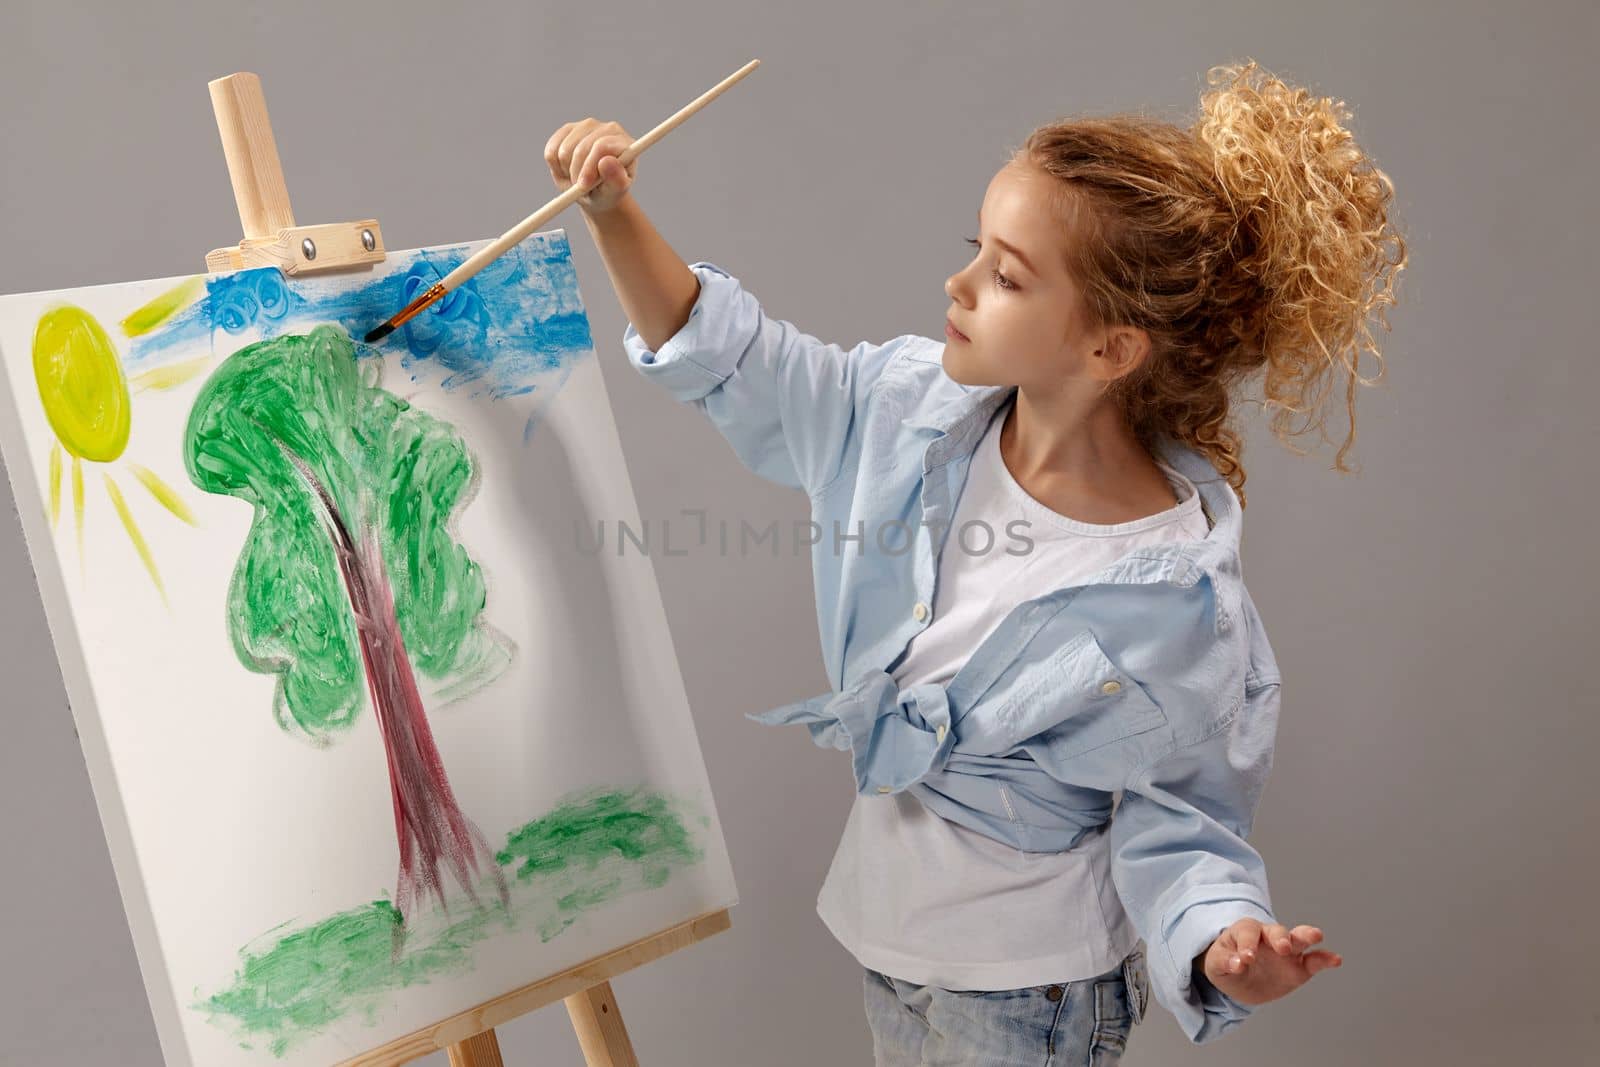 Charming school girl whith a curly hair, wearing in a blue shirt and white t-shirt is painting with a watercolor brush on an easel, standing on a gray background.